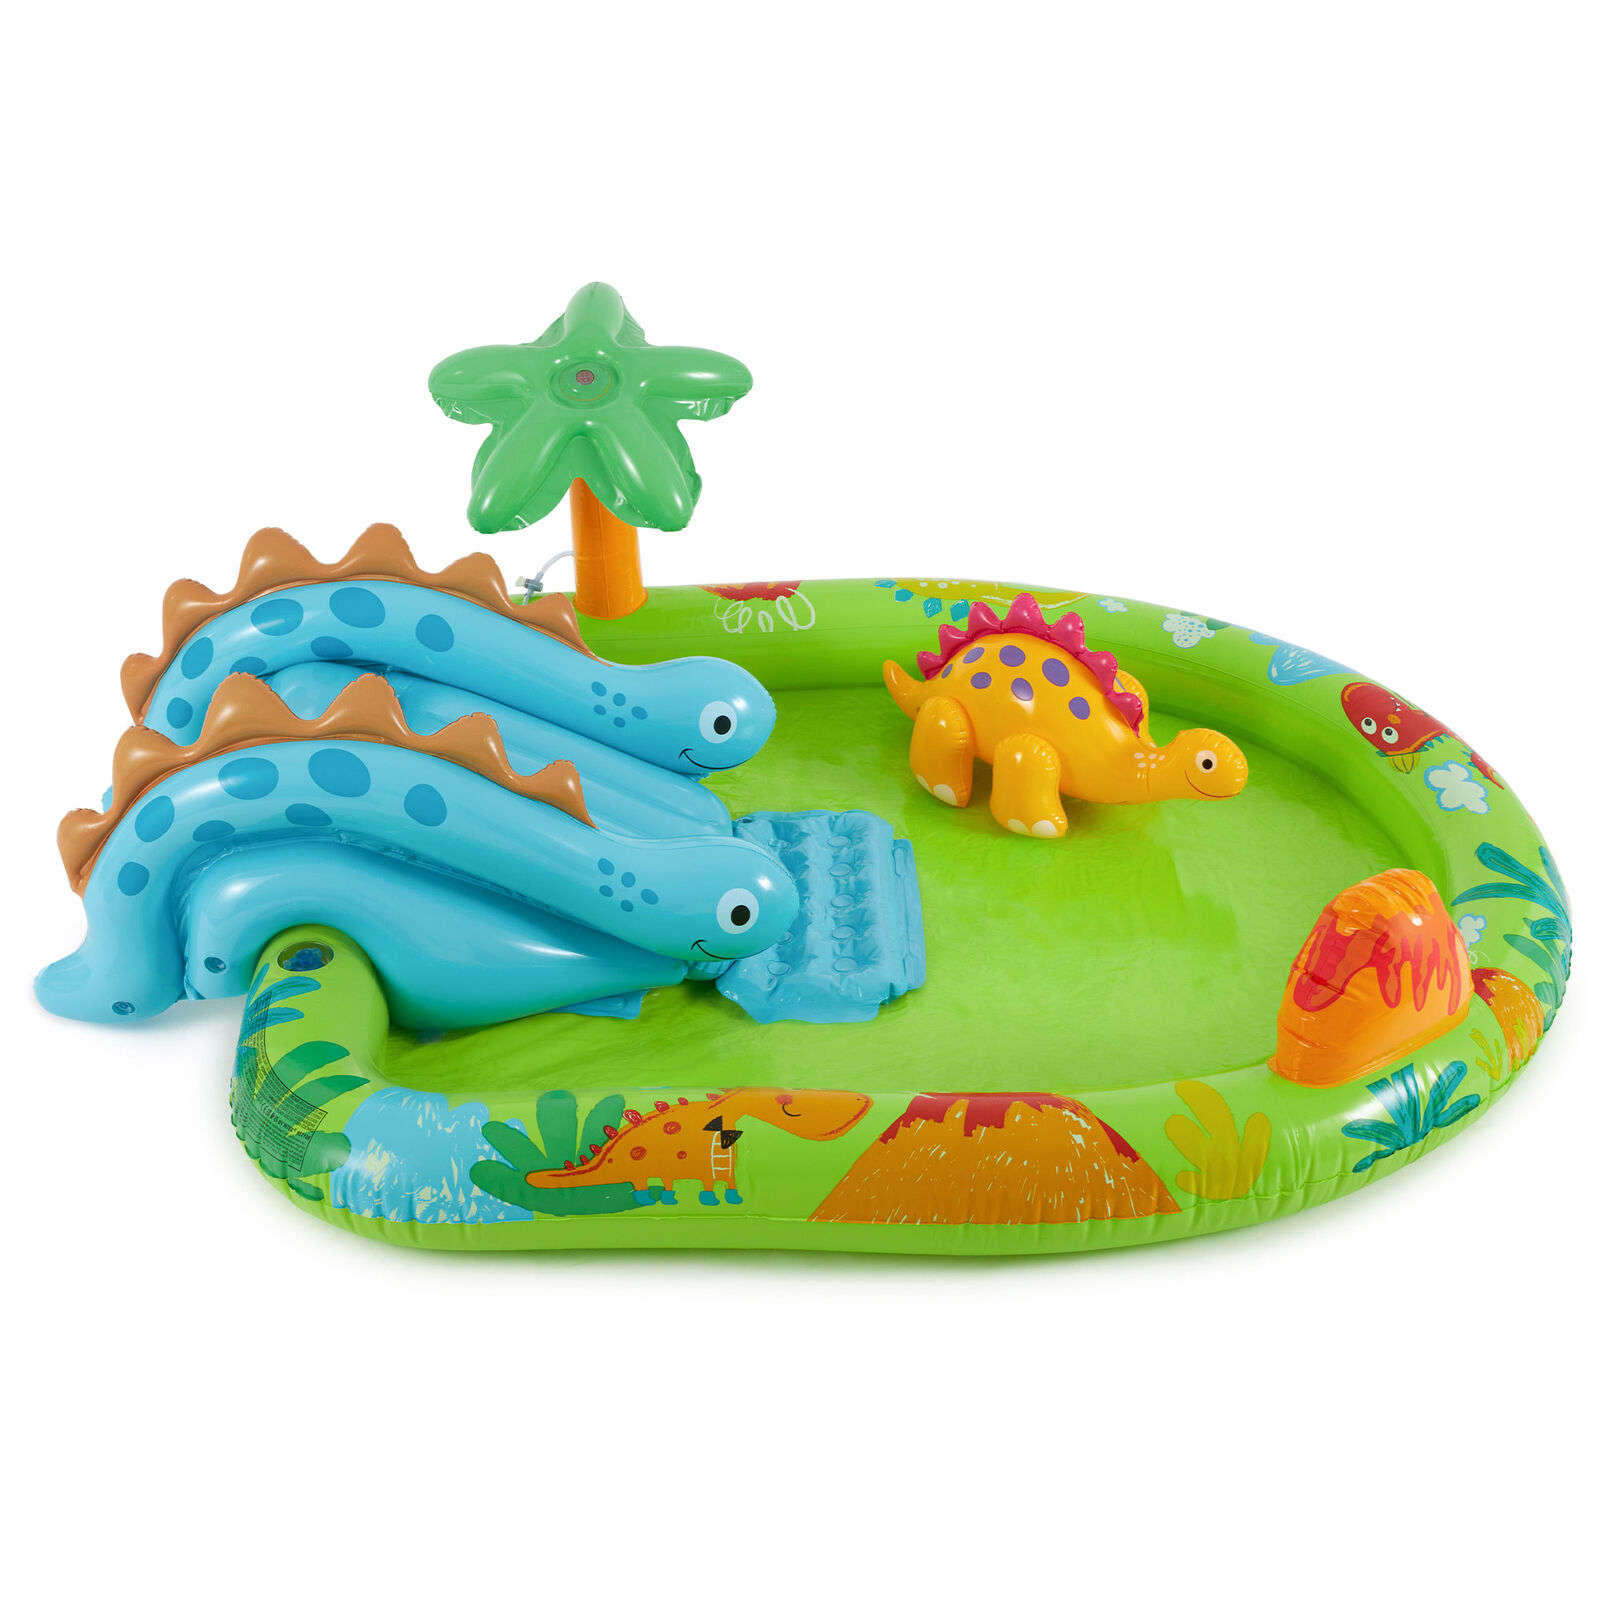 Intex Little Dino Inflatable Pool Play Center w/Multi-Color Fun Ballz 100 Pack